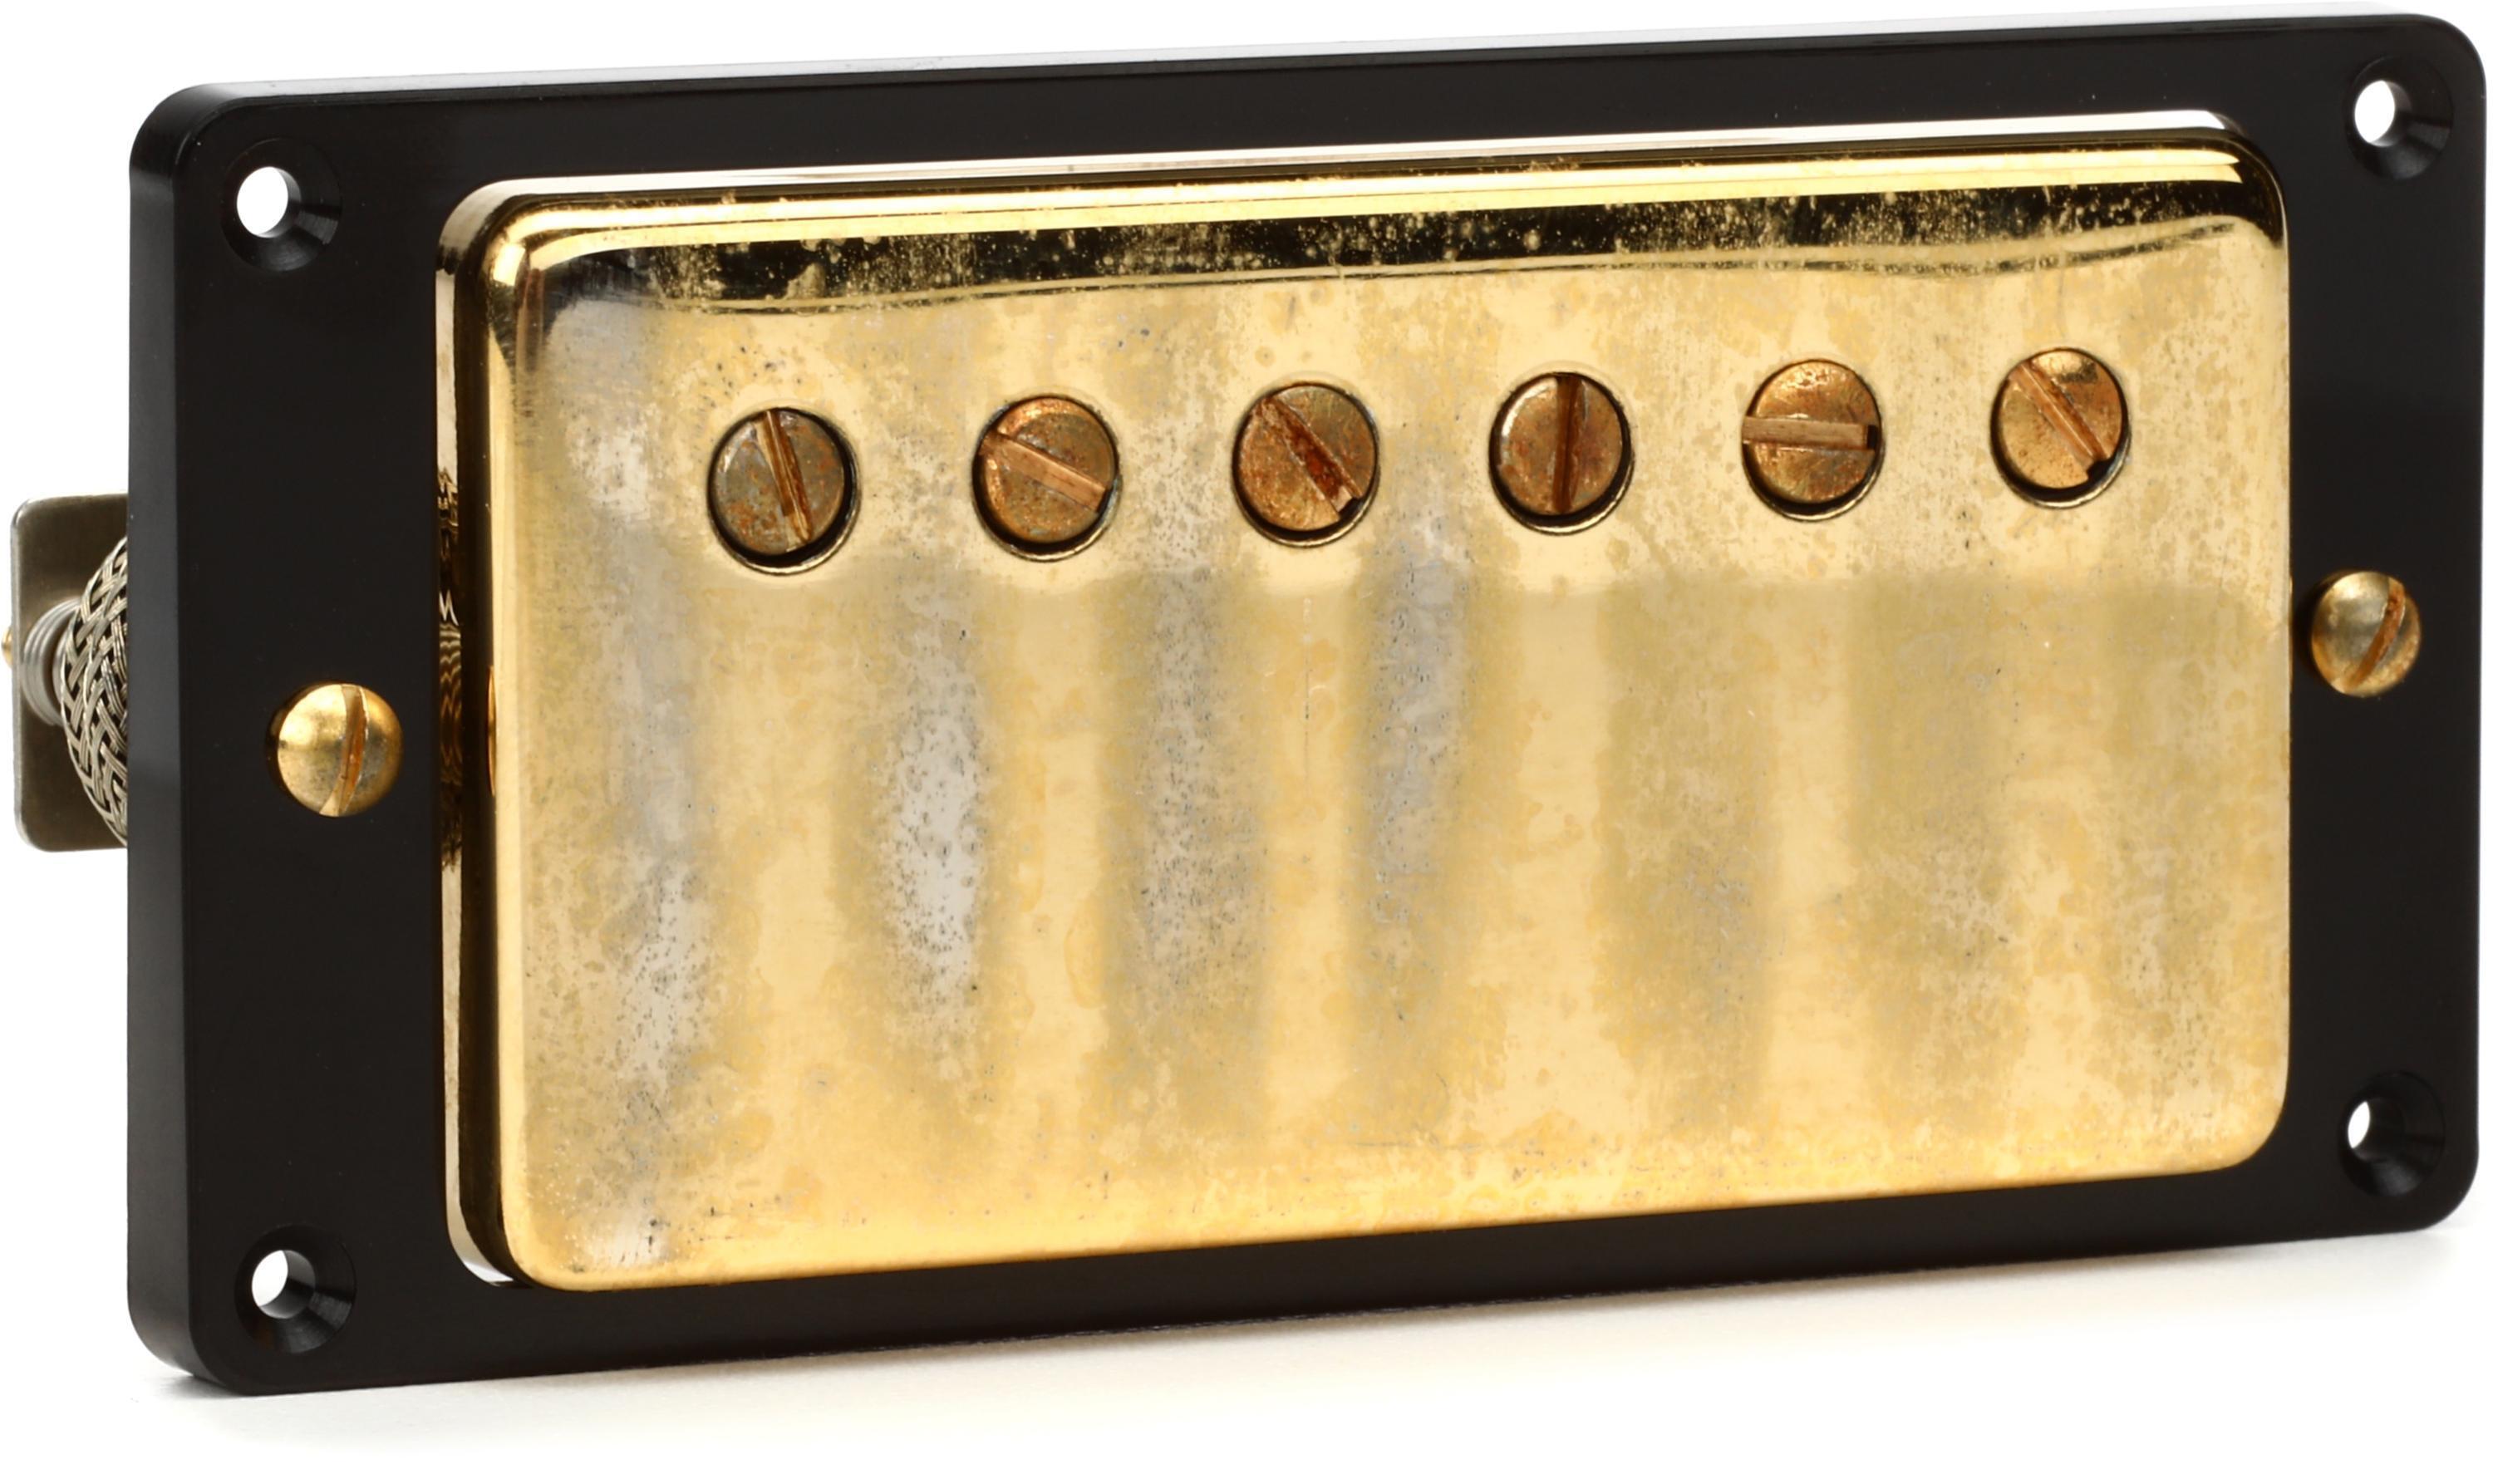 Seymour Duncan Antiquity Neck Humbucker Pickup - Aged Gold Cover